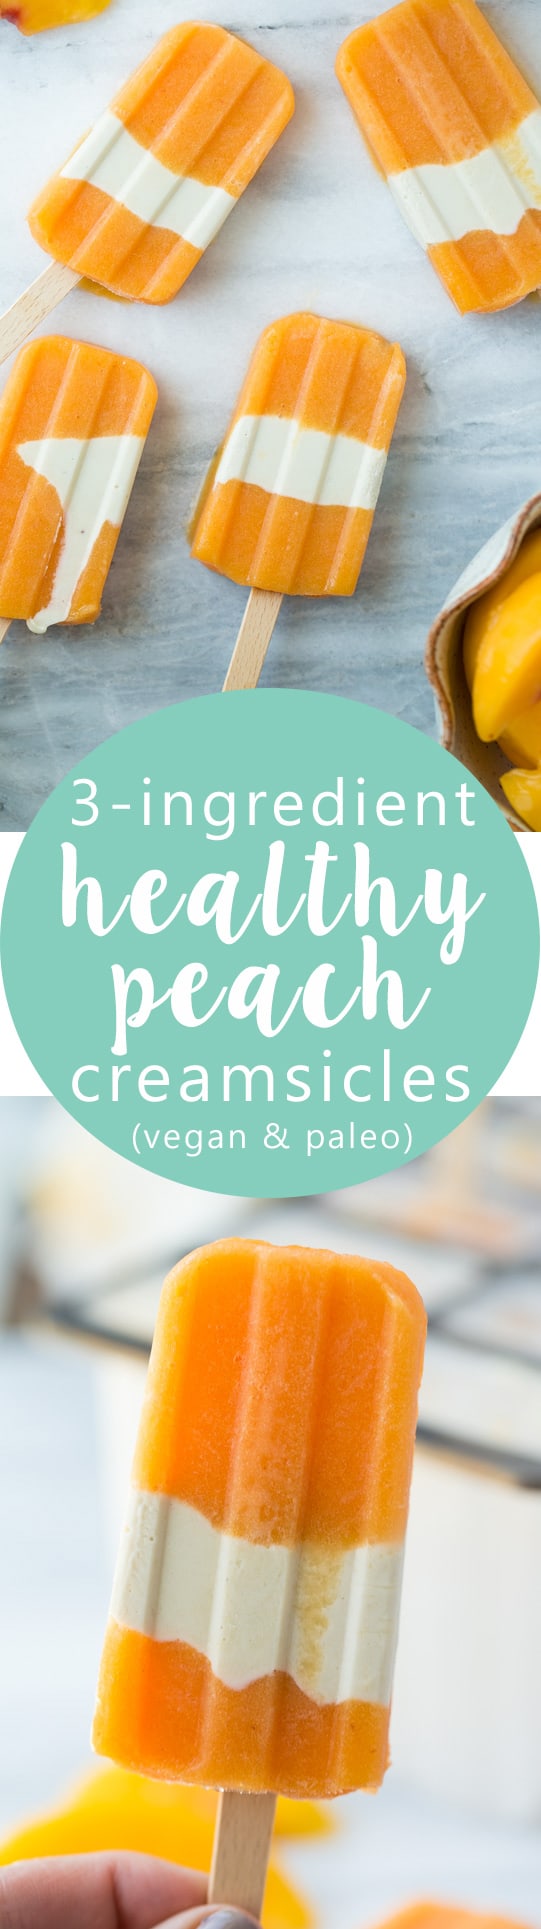 3-Ingredient Healthy Peach Creamsicles! So easy to make and perfect for a healthy summer treat!